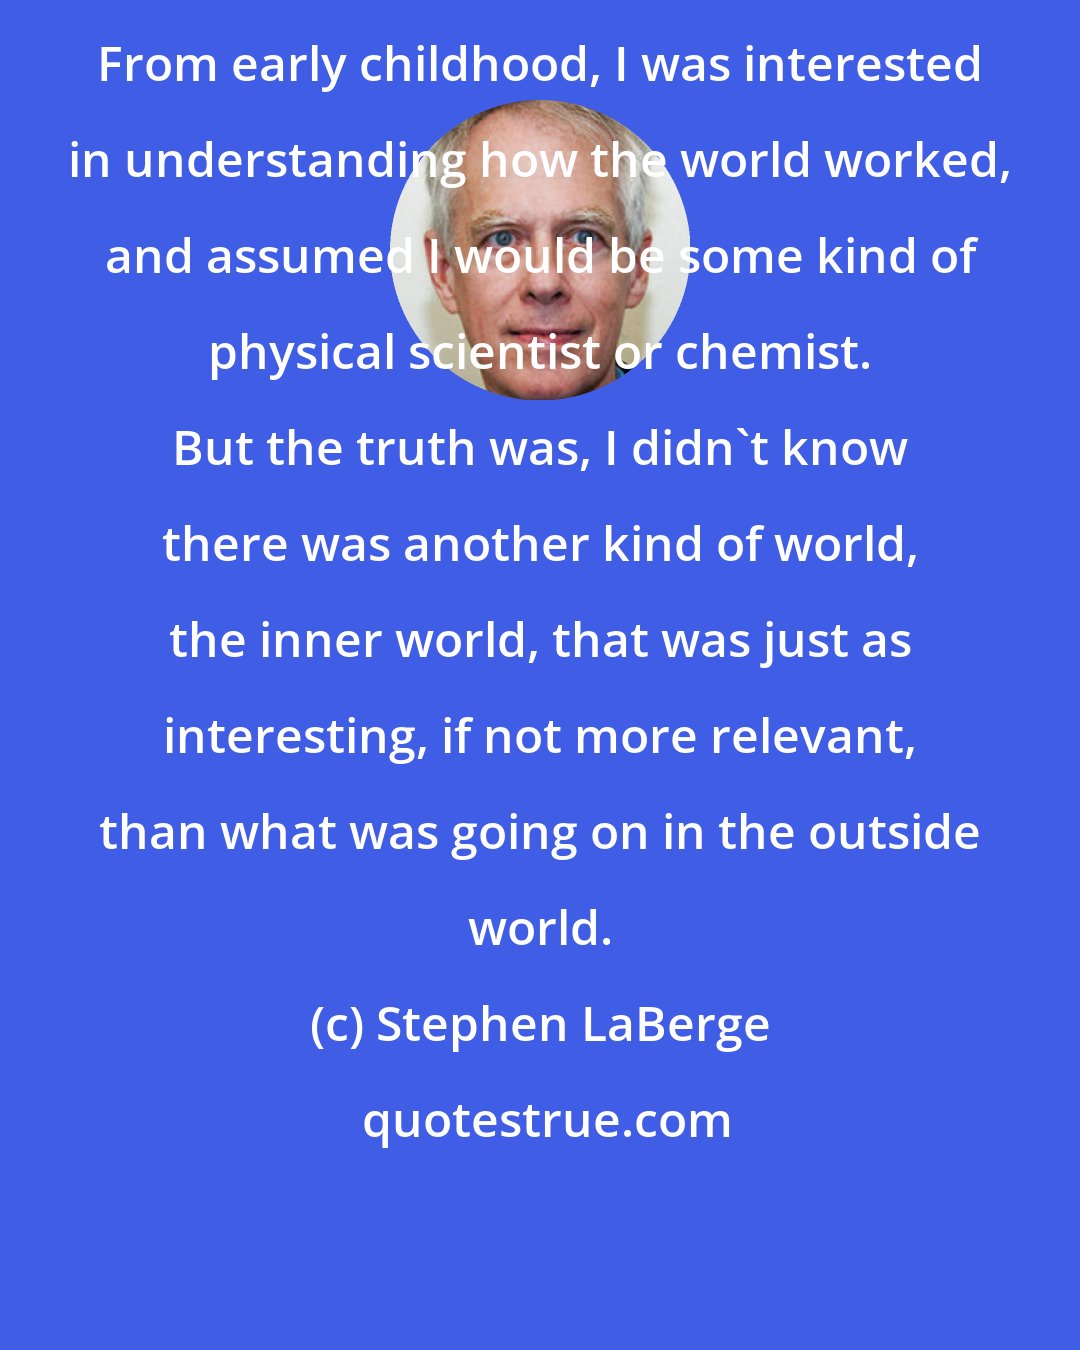 Stephen LaBerge: From early childhood, I was interested in understanding how the world worked, and assumed I would be some kind of physical scientist or chemist. But the truth was, I didn't know there was another kind of world, the inner world, that was just as interesting, if not more relevant, than what was going on in the outside world.